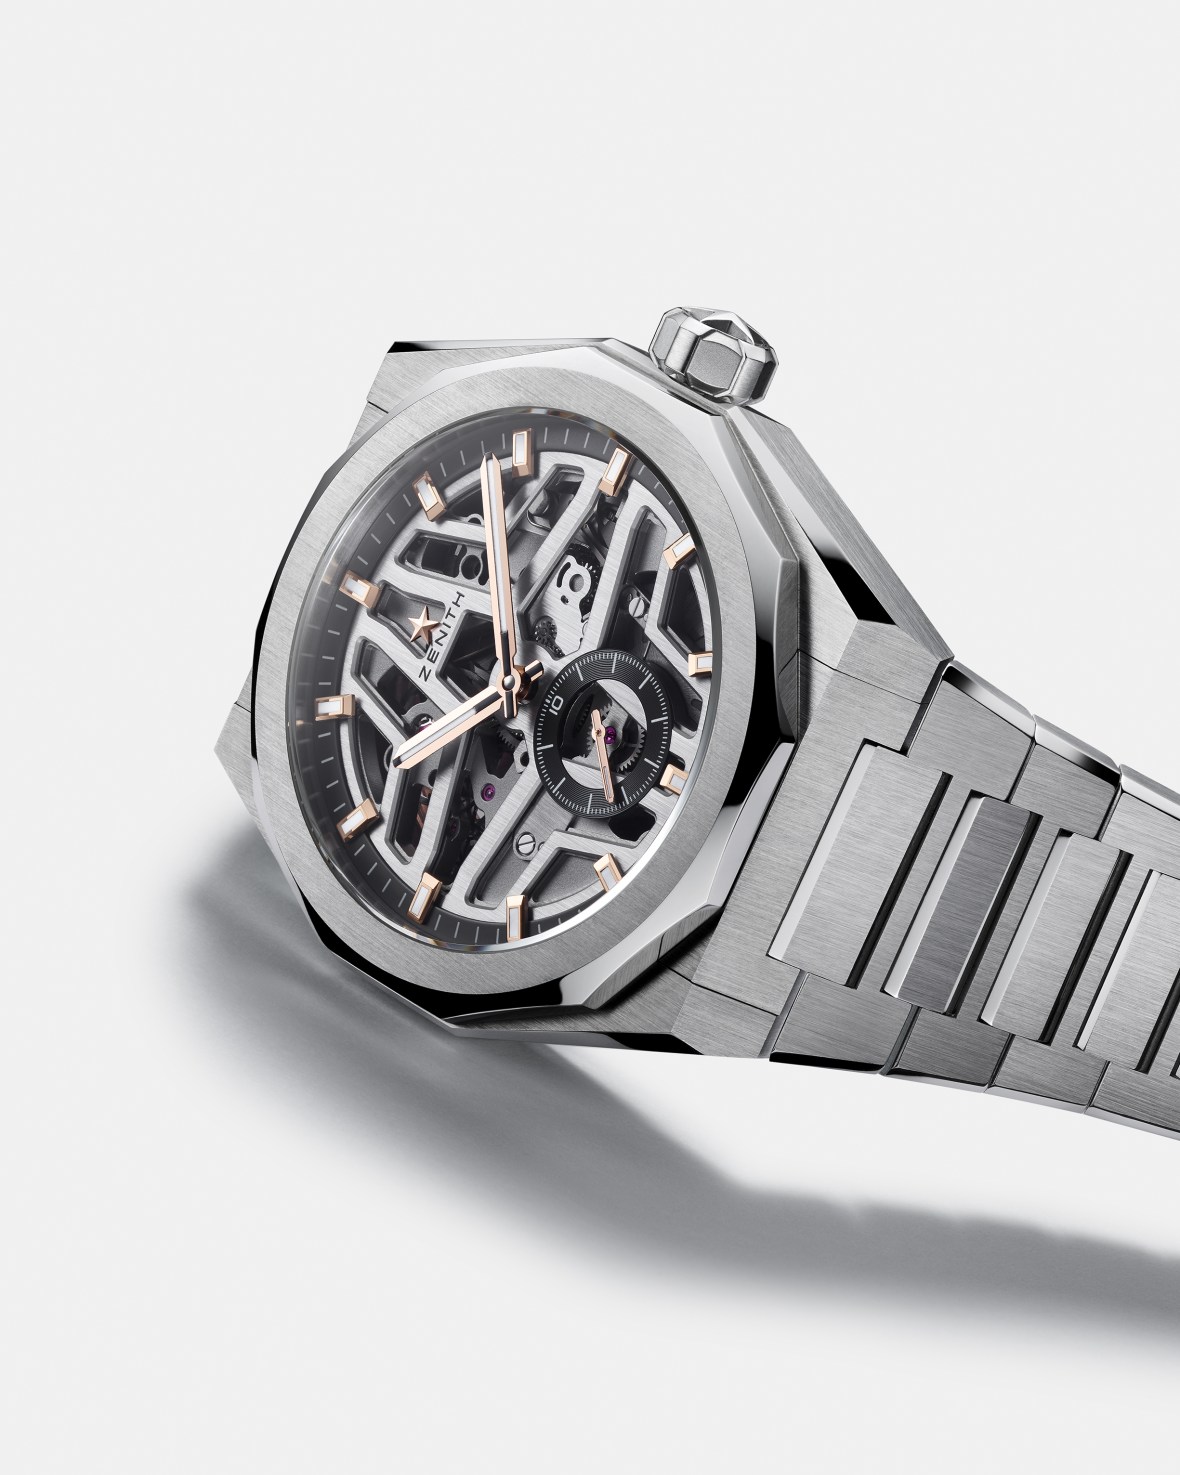 Zenith Defy Skyline Skeleton Boutique Edition 1 Zenith Launches World'S First Skeleton Watch With 1/10Th Of A